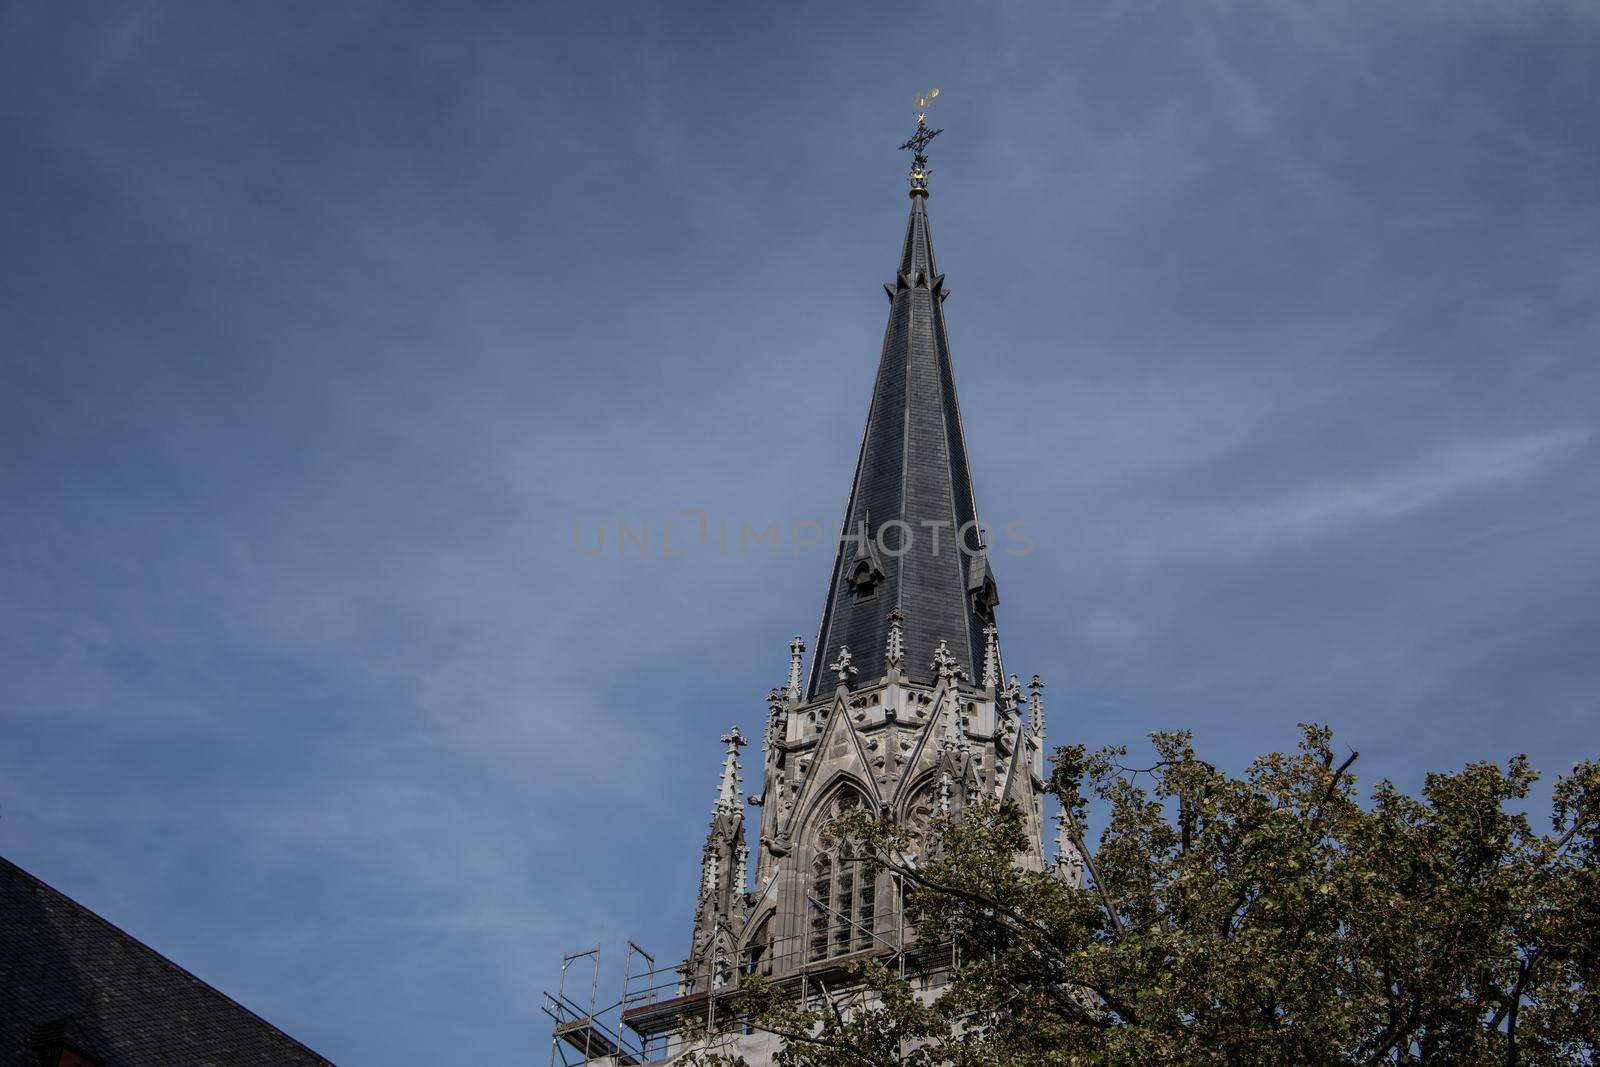 Aachen Cathedral with pointed towers by Dr-Lange